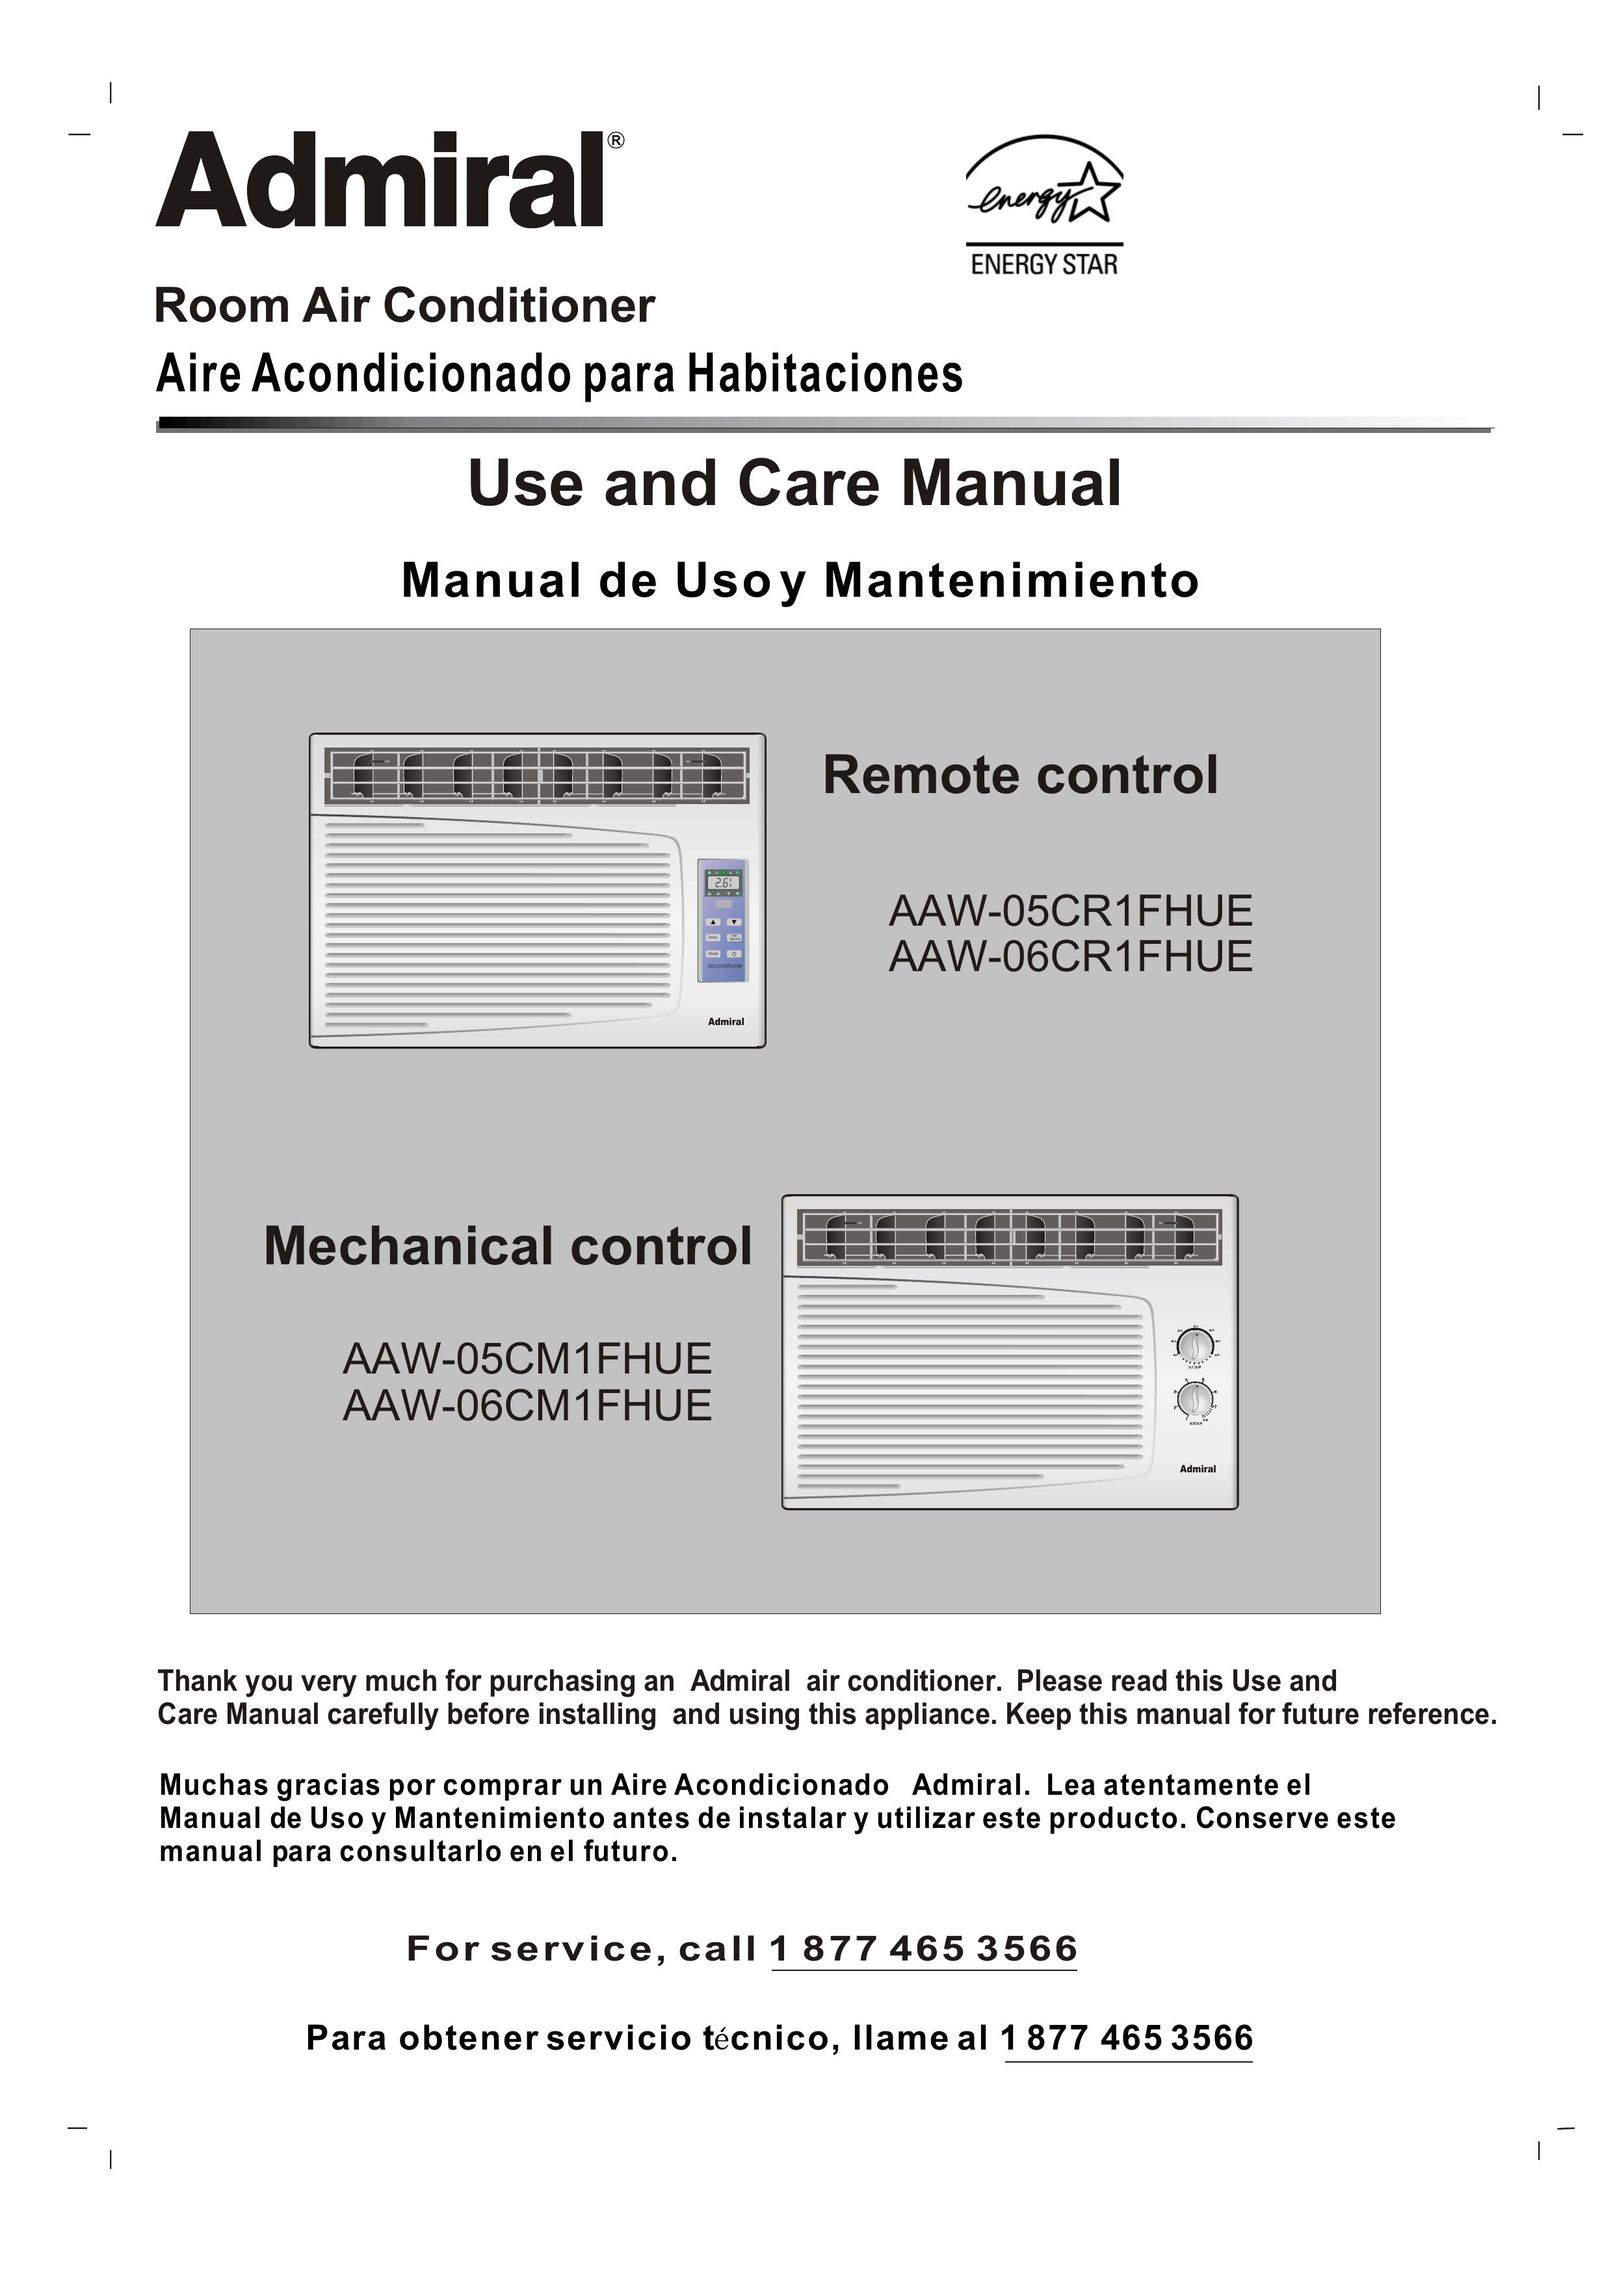 Admiral AAW-06CM1FHUE Air Conditioner User Manual (Page 1)